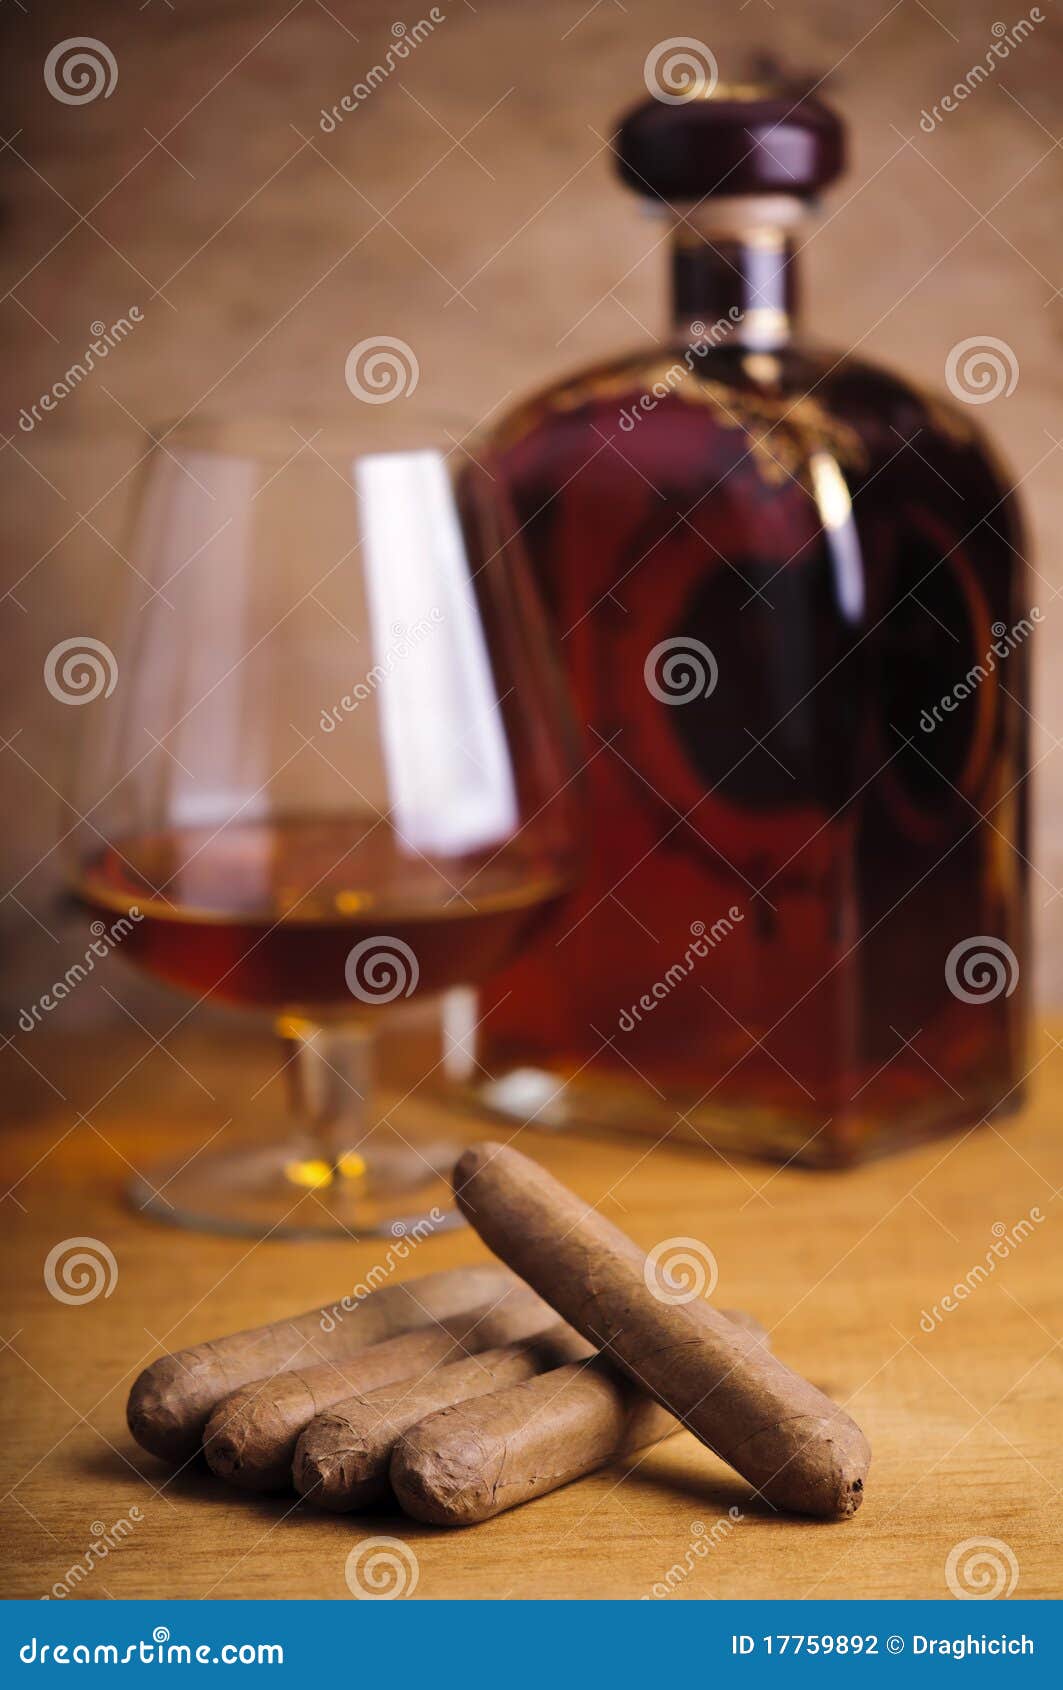 cuban cigars and french cognac